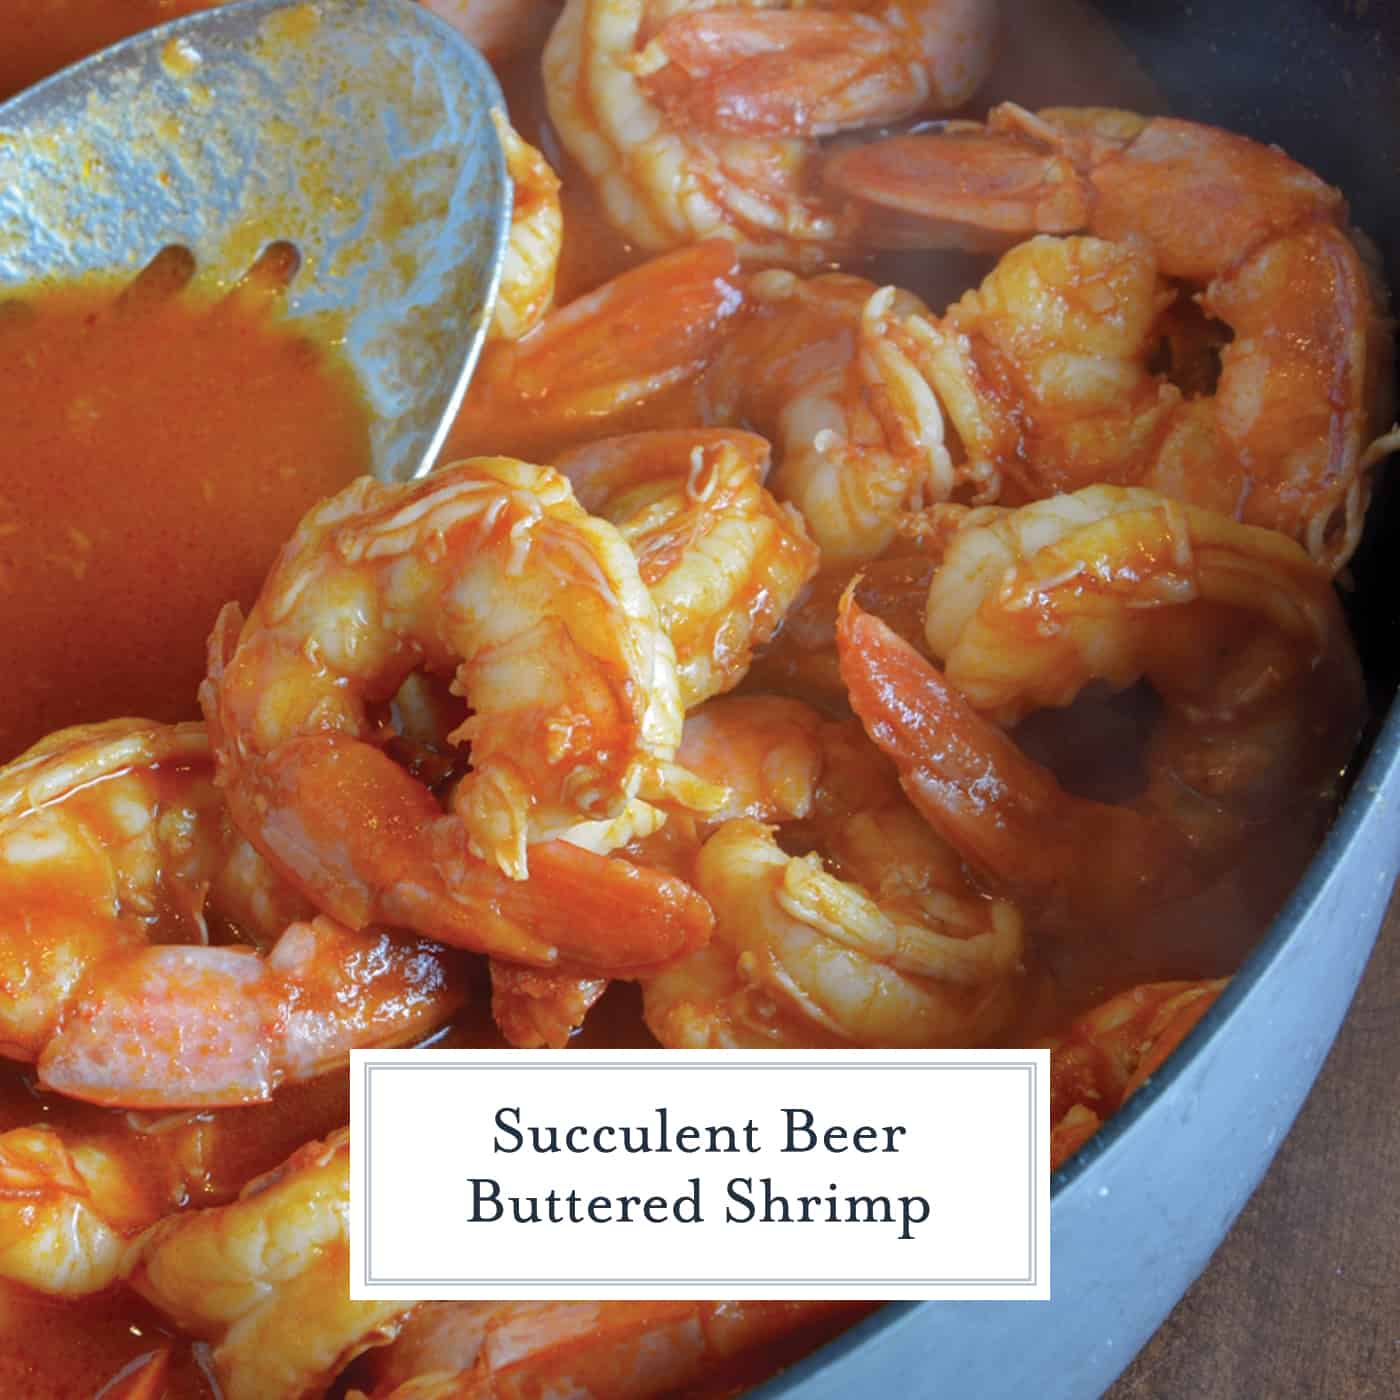 Beer Buttered Shrimp is a tomato based sauce infused with your choice of beer, spices and simmered with shrimp. Serve as an appetizer or over rice as an entree. #butteredshrimprecipe #easyshrimprecipe www.savoryexperiments.com 